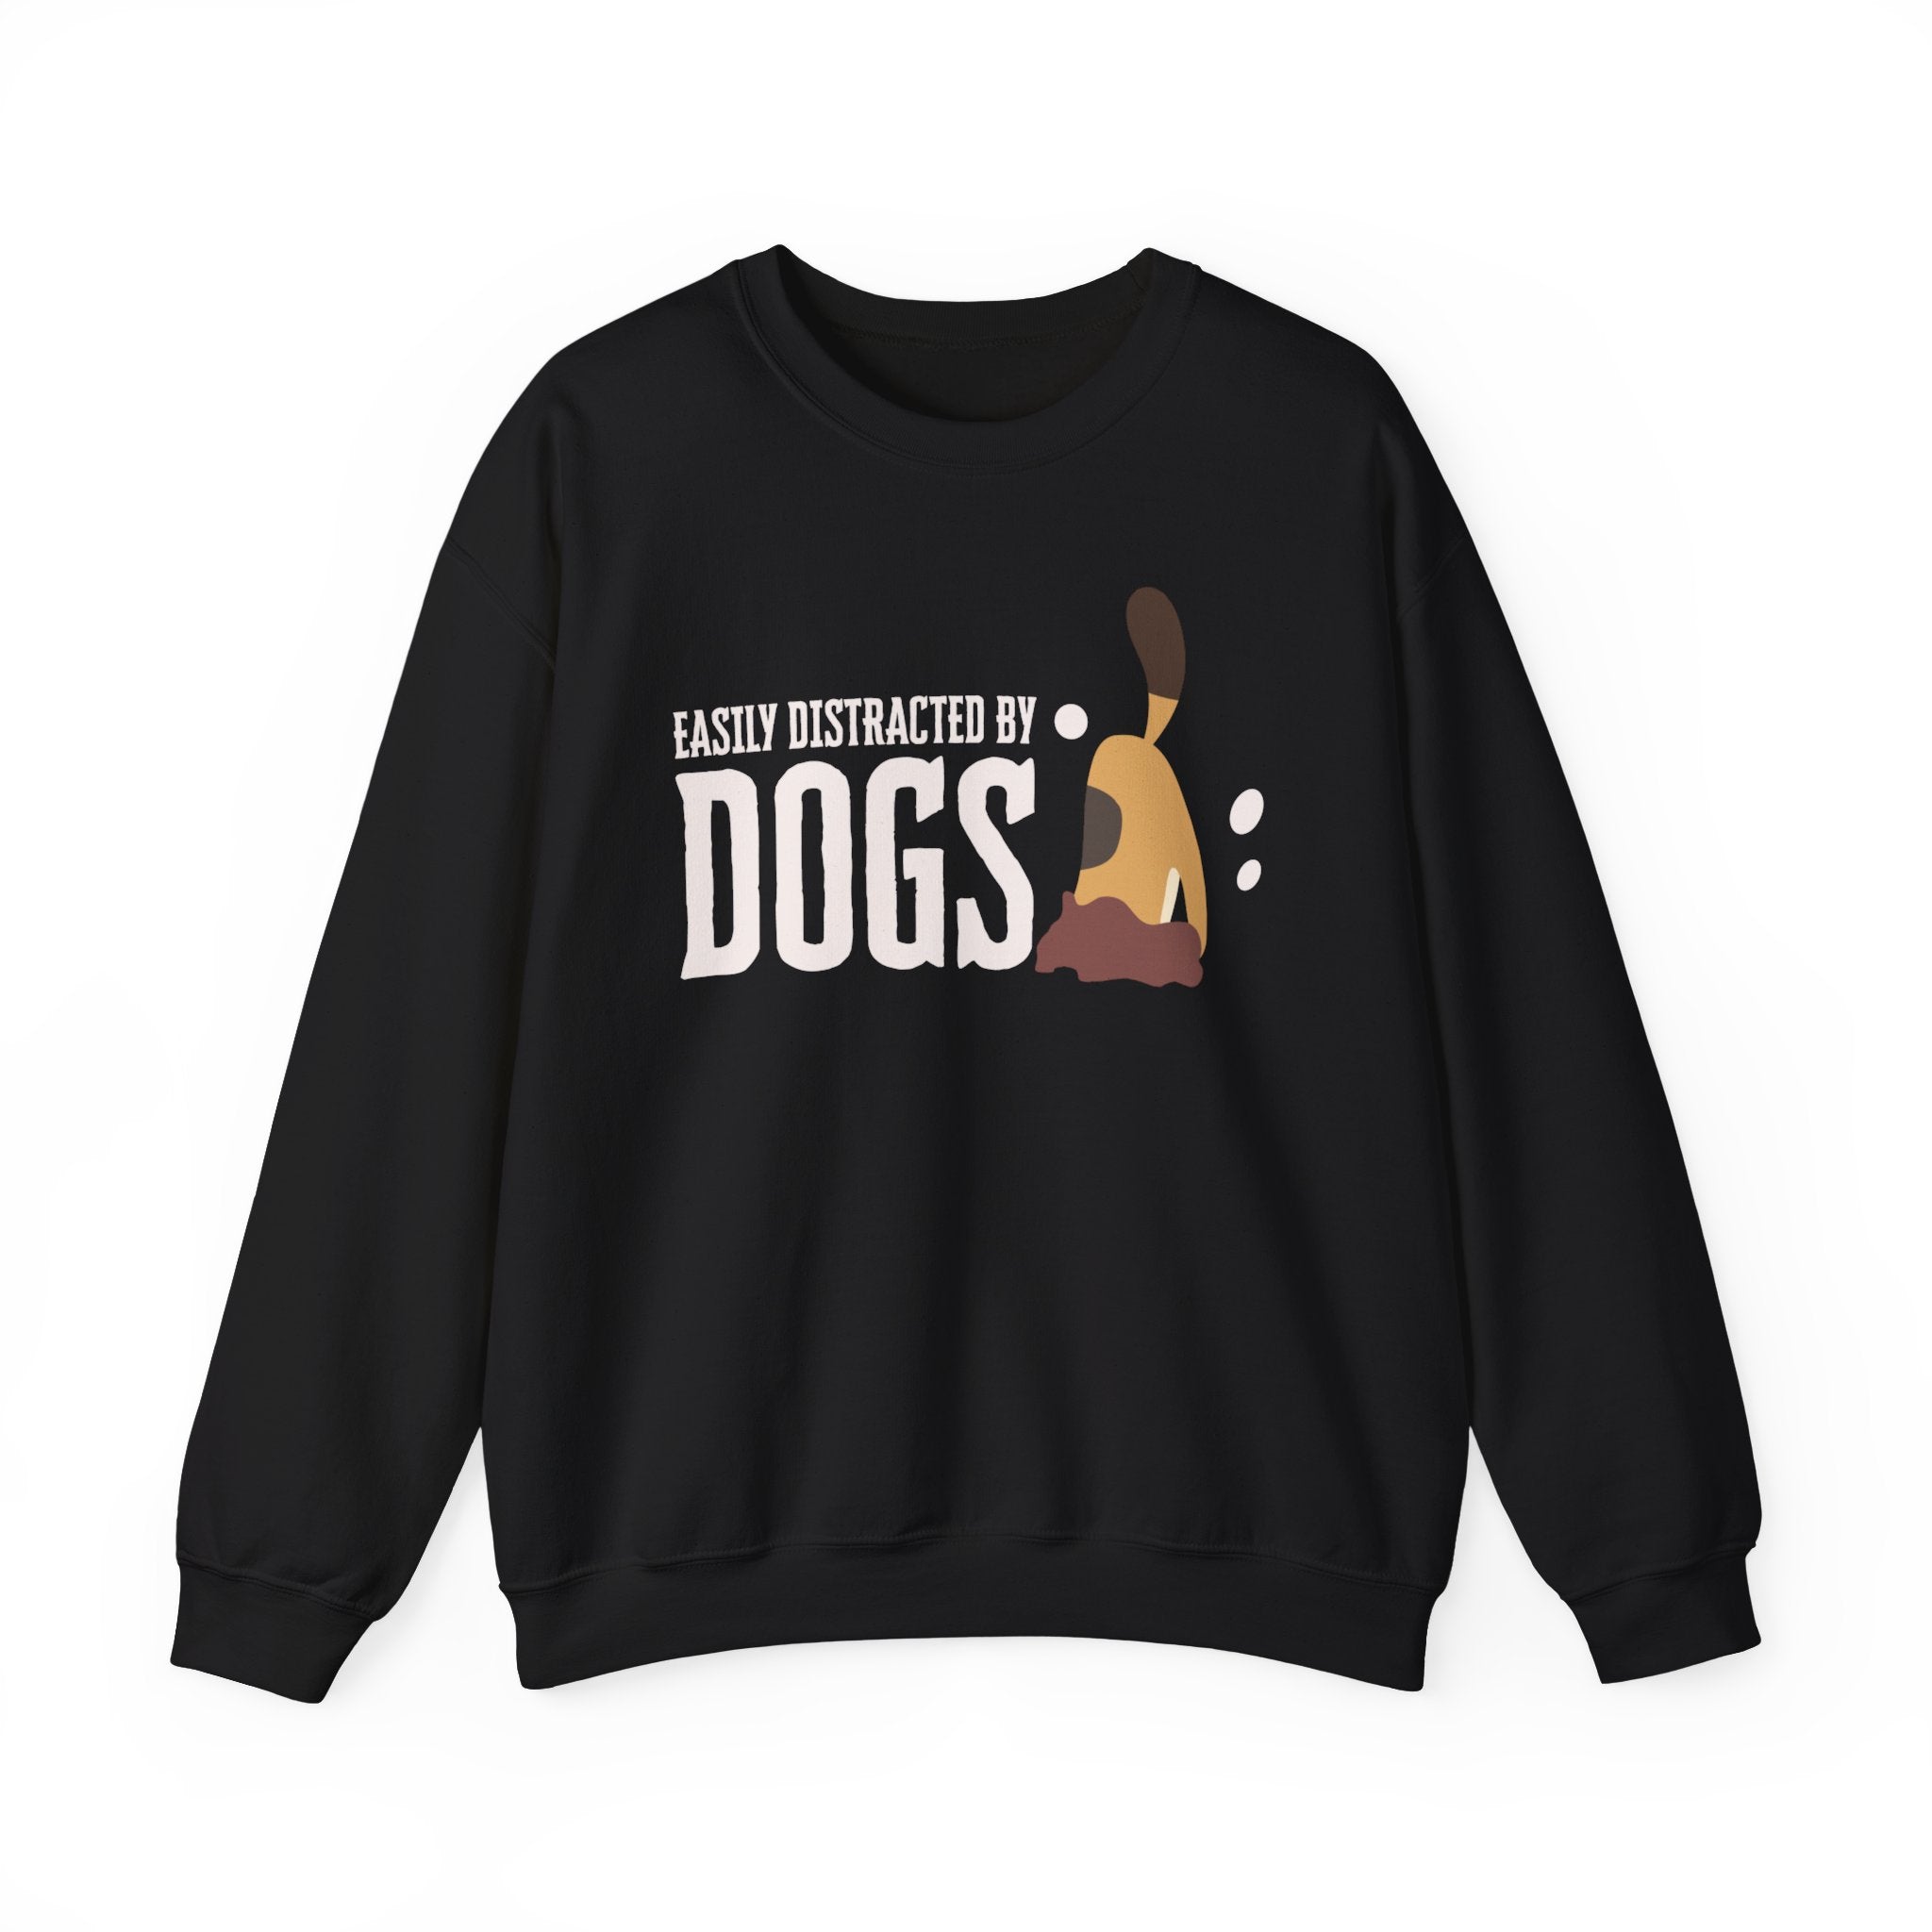 Surrounded by a white canvas, a ‘Dogs Pure Love, Dog Dig’ unisex black sweatshirt features a dog digging with the slogan ‘Easily Distracted by Dogs.’